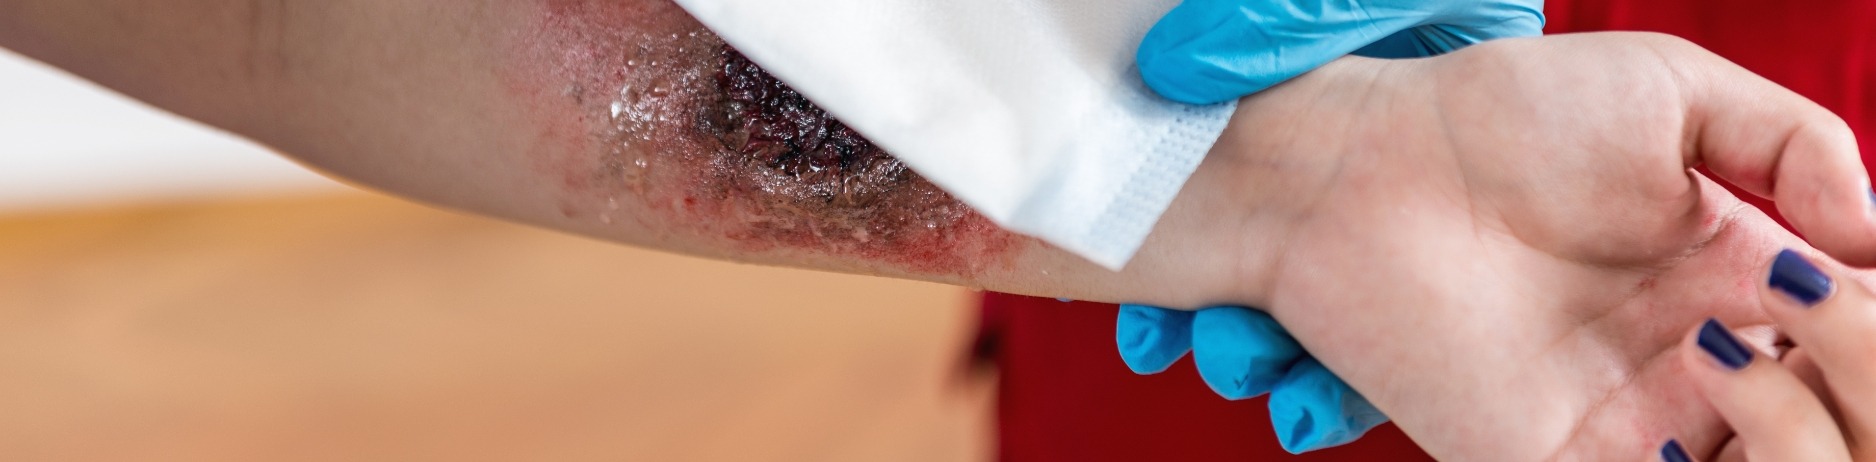 Graphic close-up of arm in burn injury case being treated by doctor's gloved hand